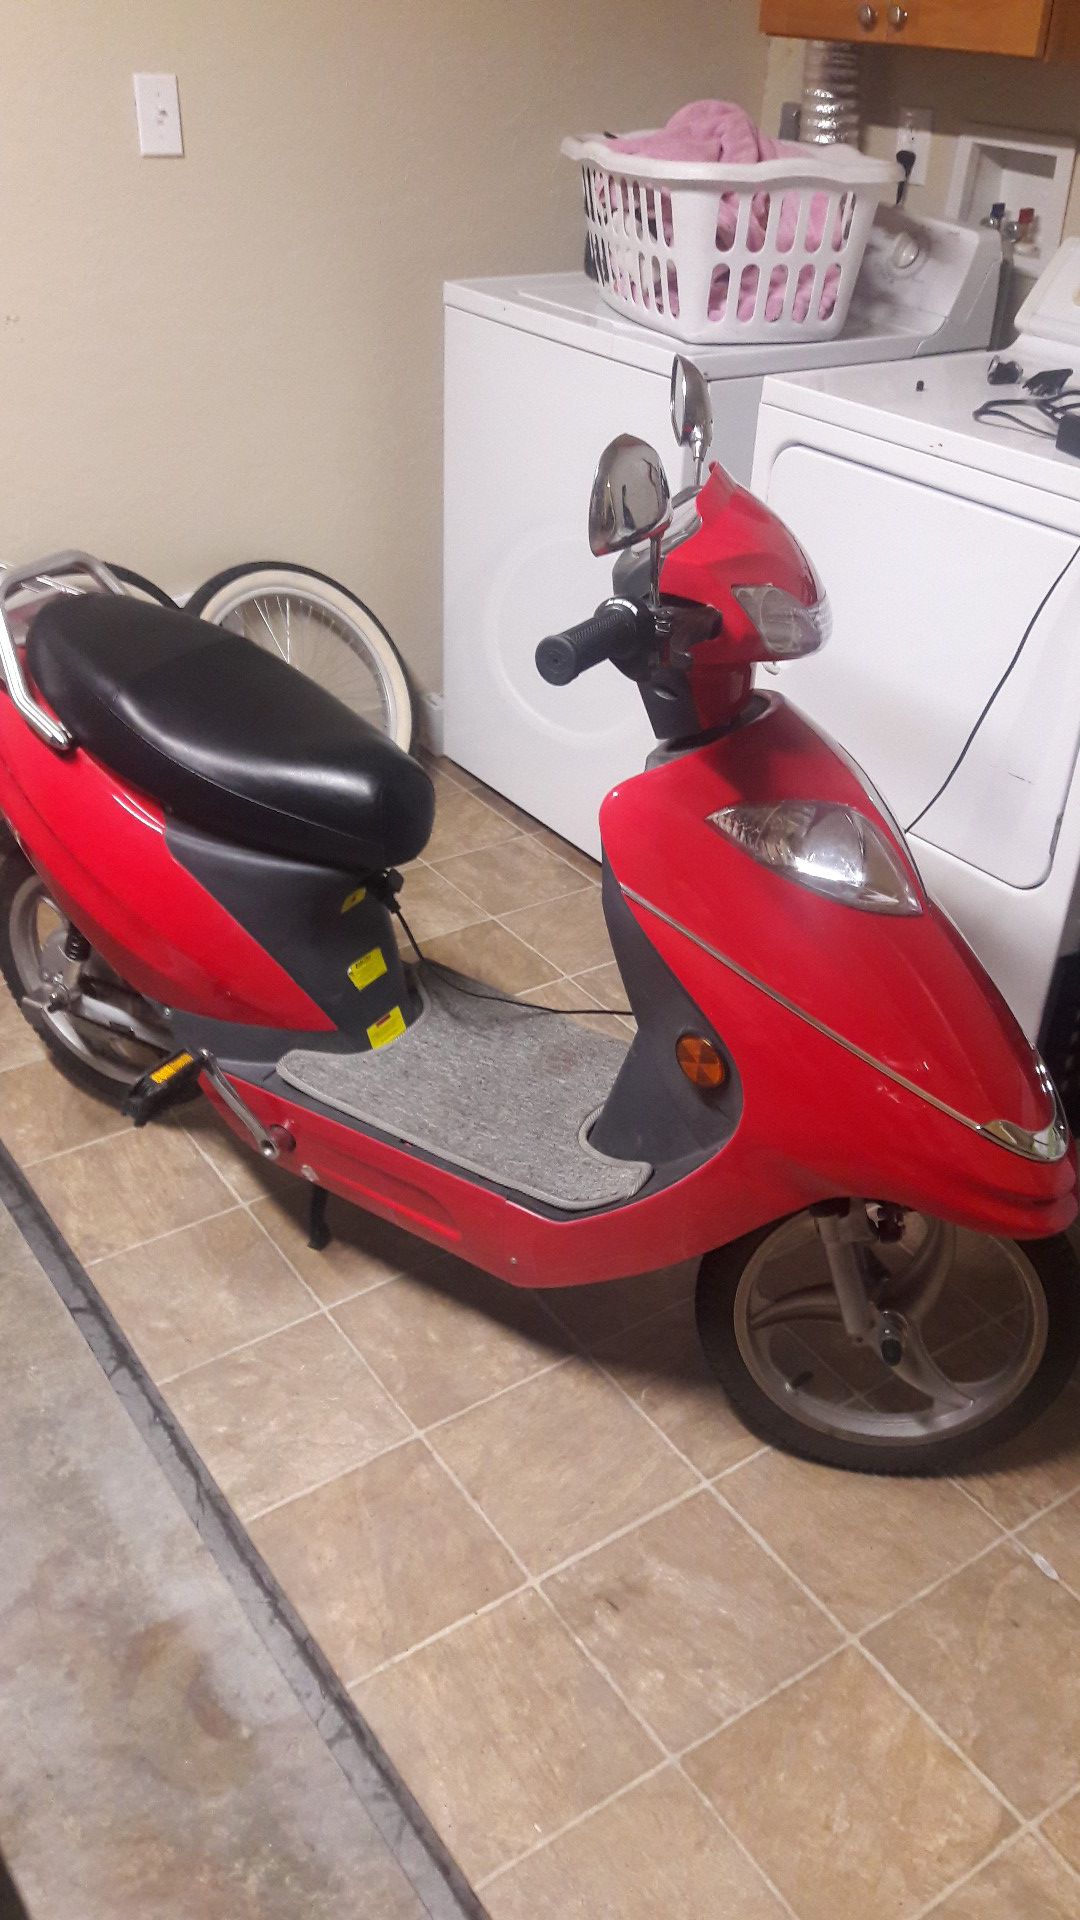 2004 voy electric scooter Sale in WA OfferUp